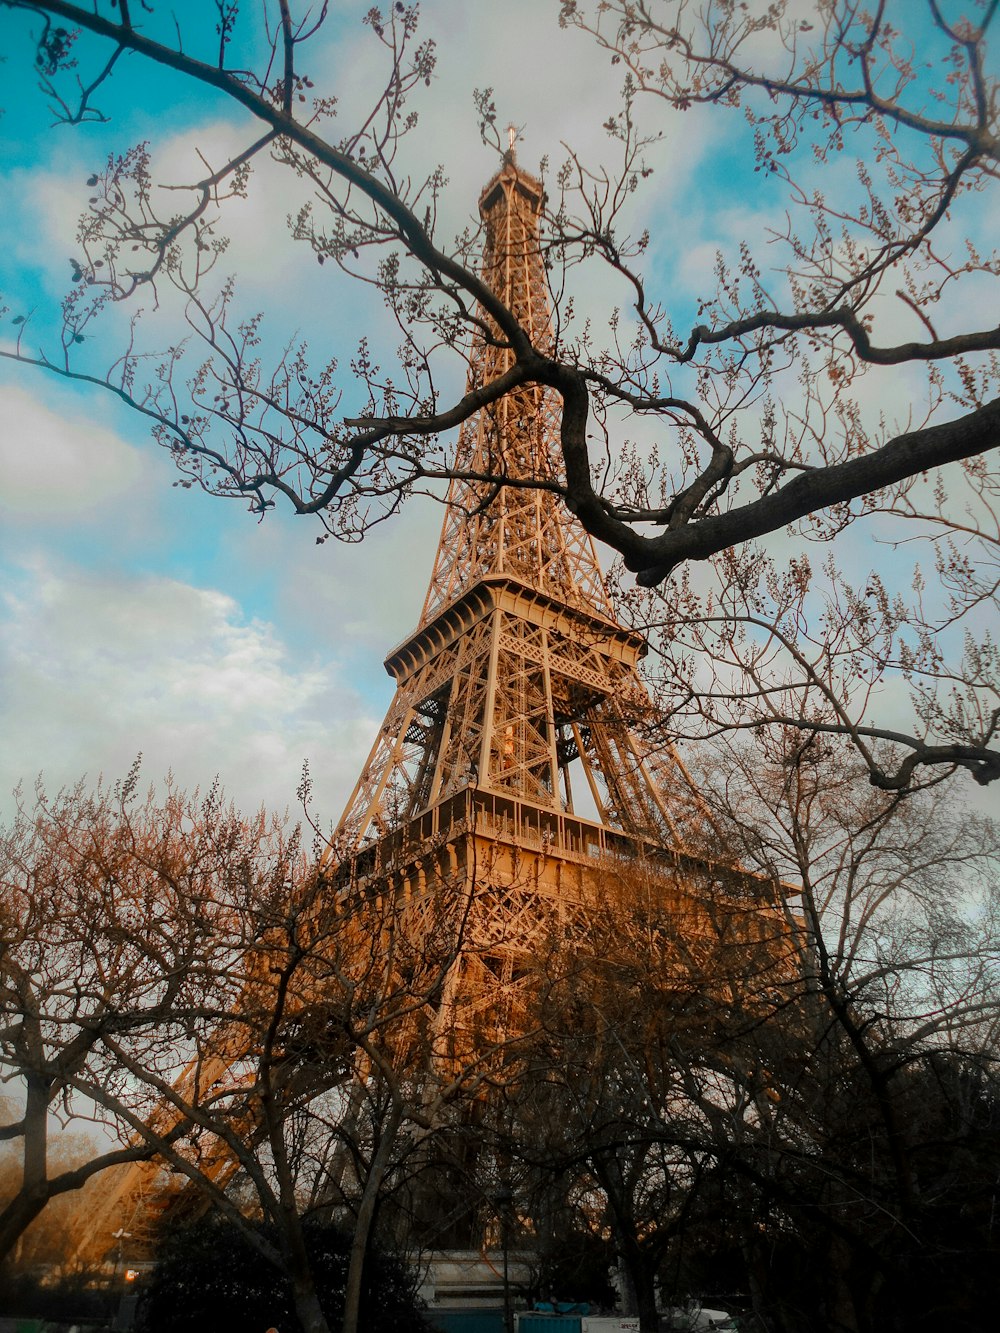 Torre Eiffel Pictures Download Free Images On Unsplash